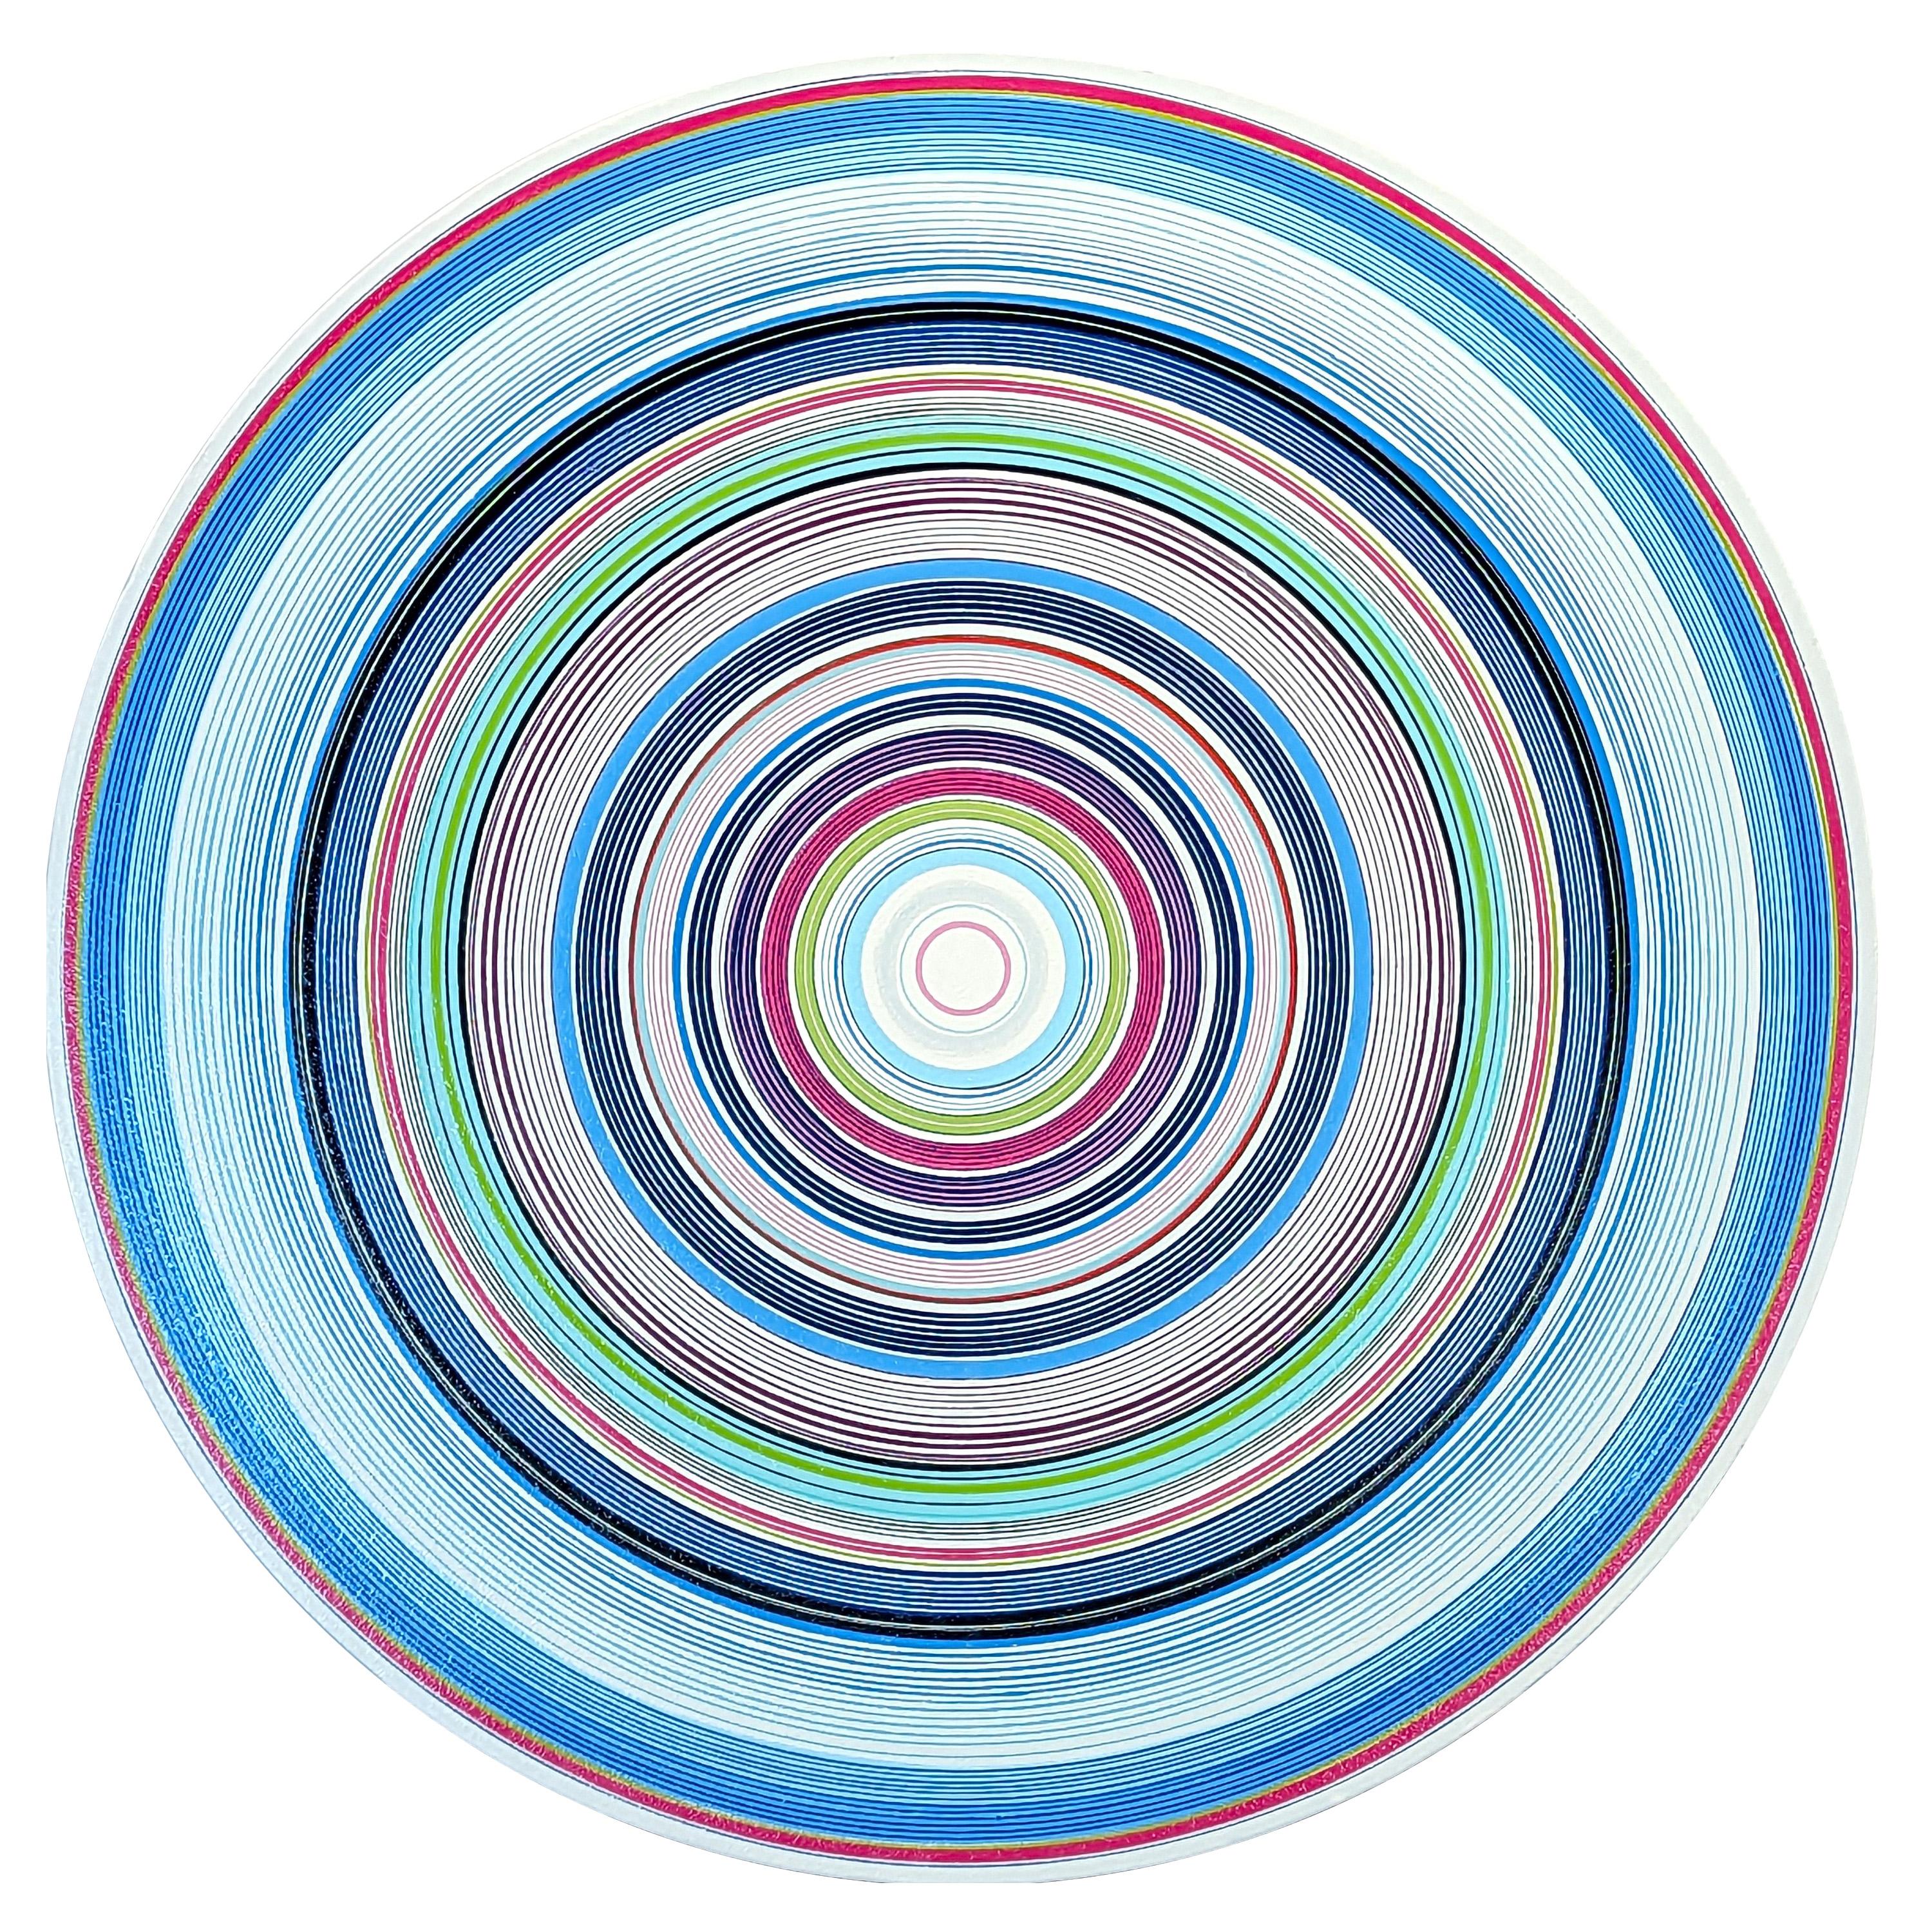 David Hardaker Abstract Painting - “Dreaming of You” Contemporary Blue, Green, and Pink Concentric Circle Painting